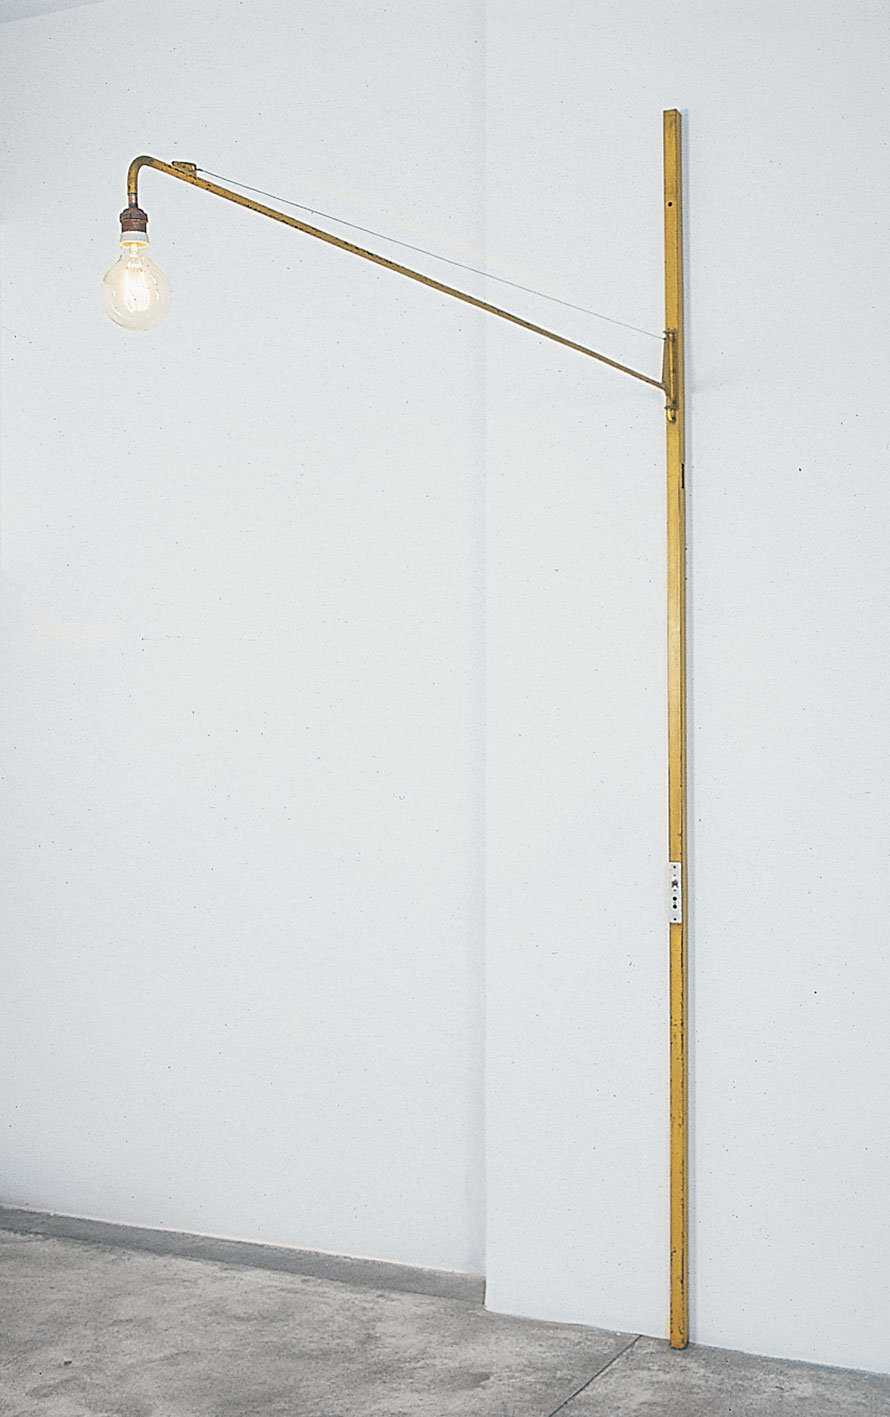 Adjustable swing-jib lamp, mounted on a squared-off long tube to hide the wiring, 1948. Provenance: École de la Verrerie, Croismare.